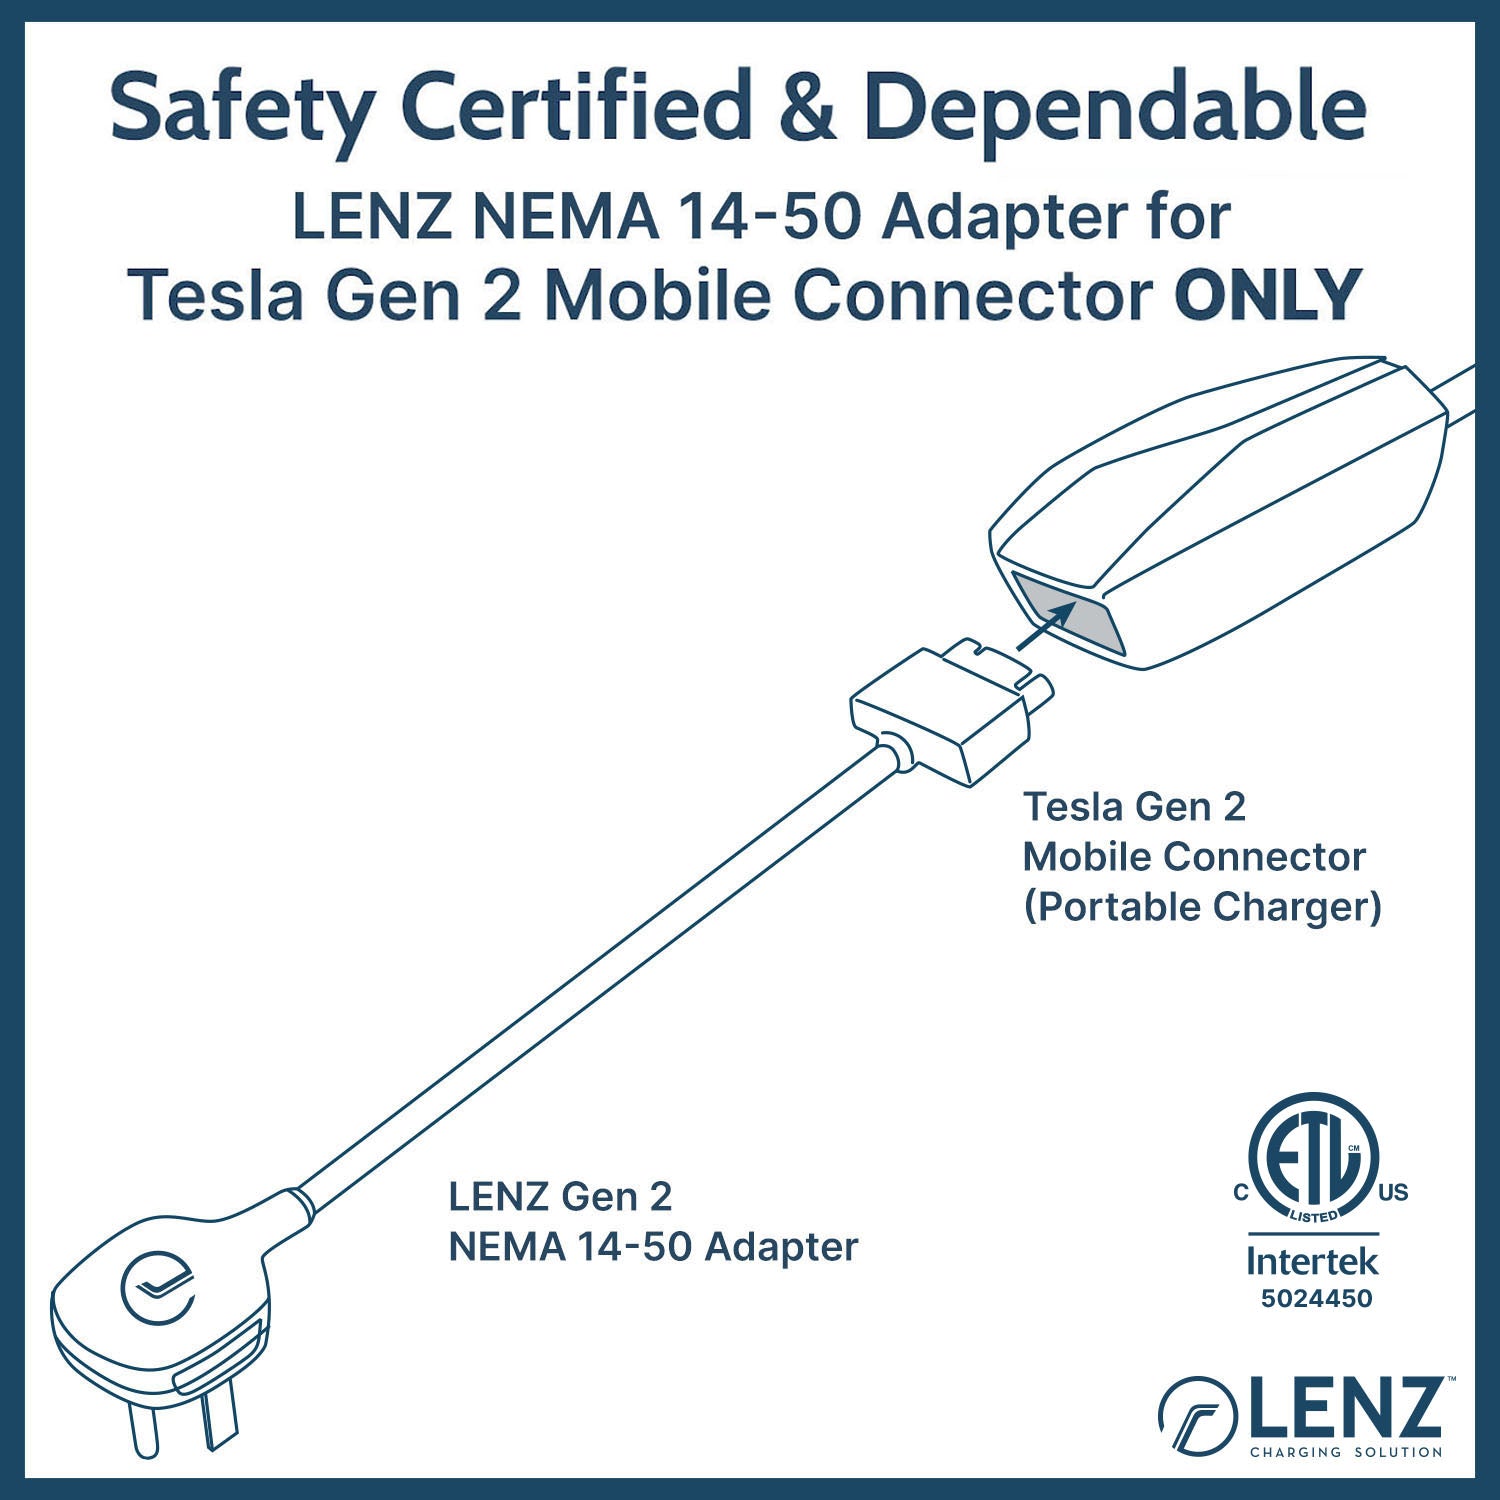 LENZ NEMA 14-50 Adapter is safety tested and certified by ETL (Intertek 5026085) and compatible with Tesla Gen 2 Mobile Connector ONLY